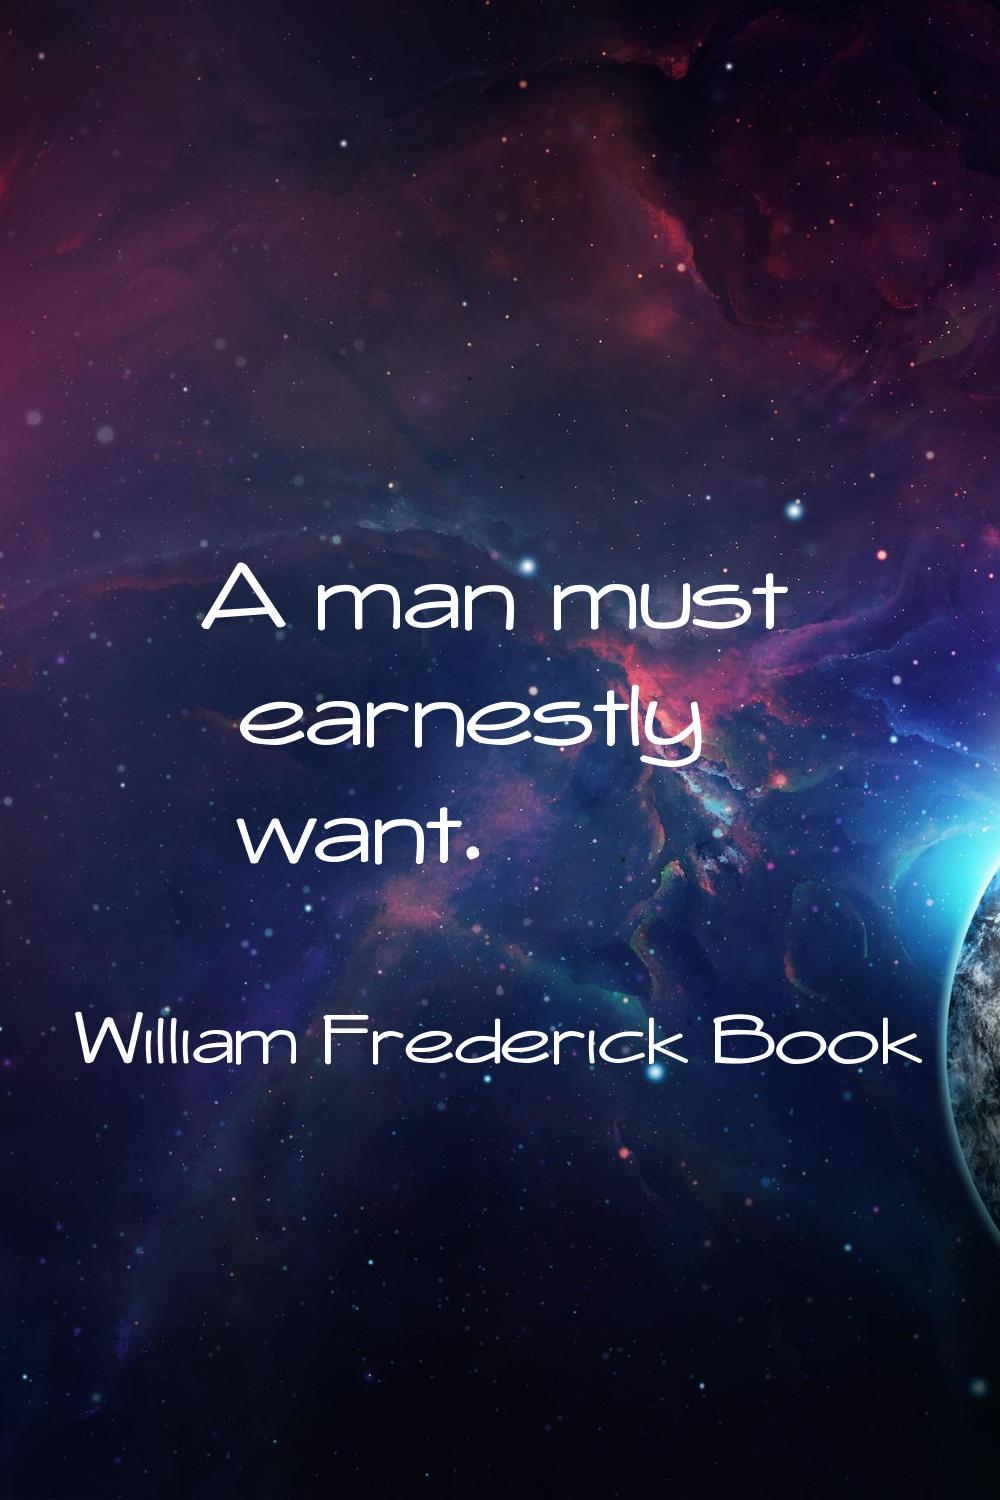 A man must earnestly want.